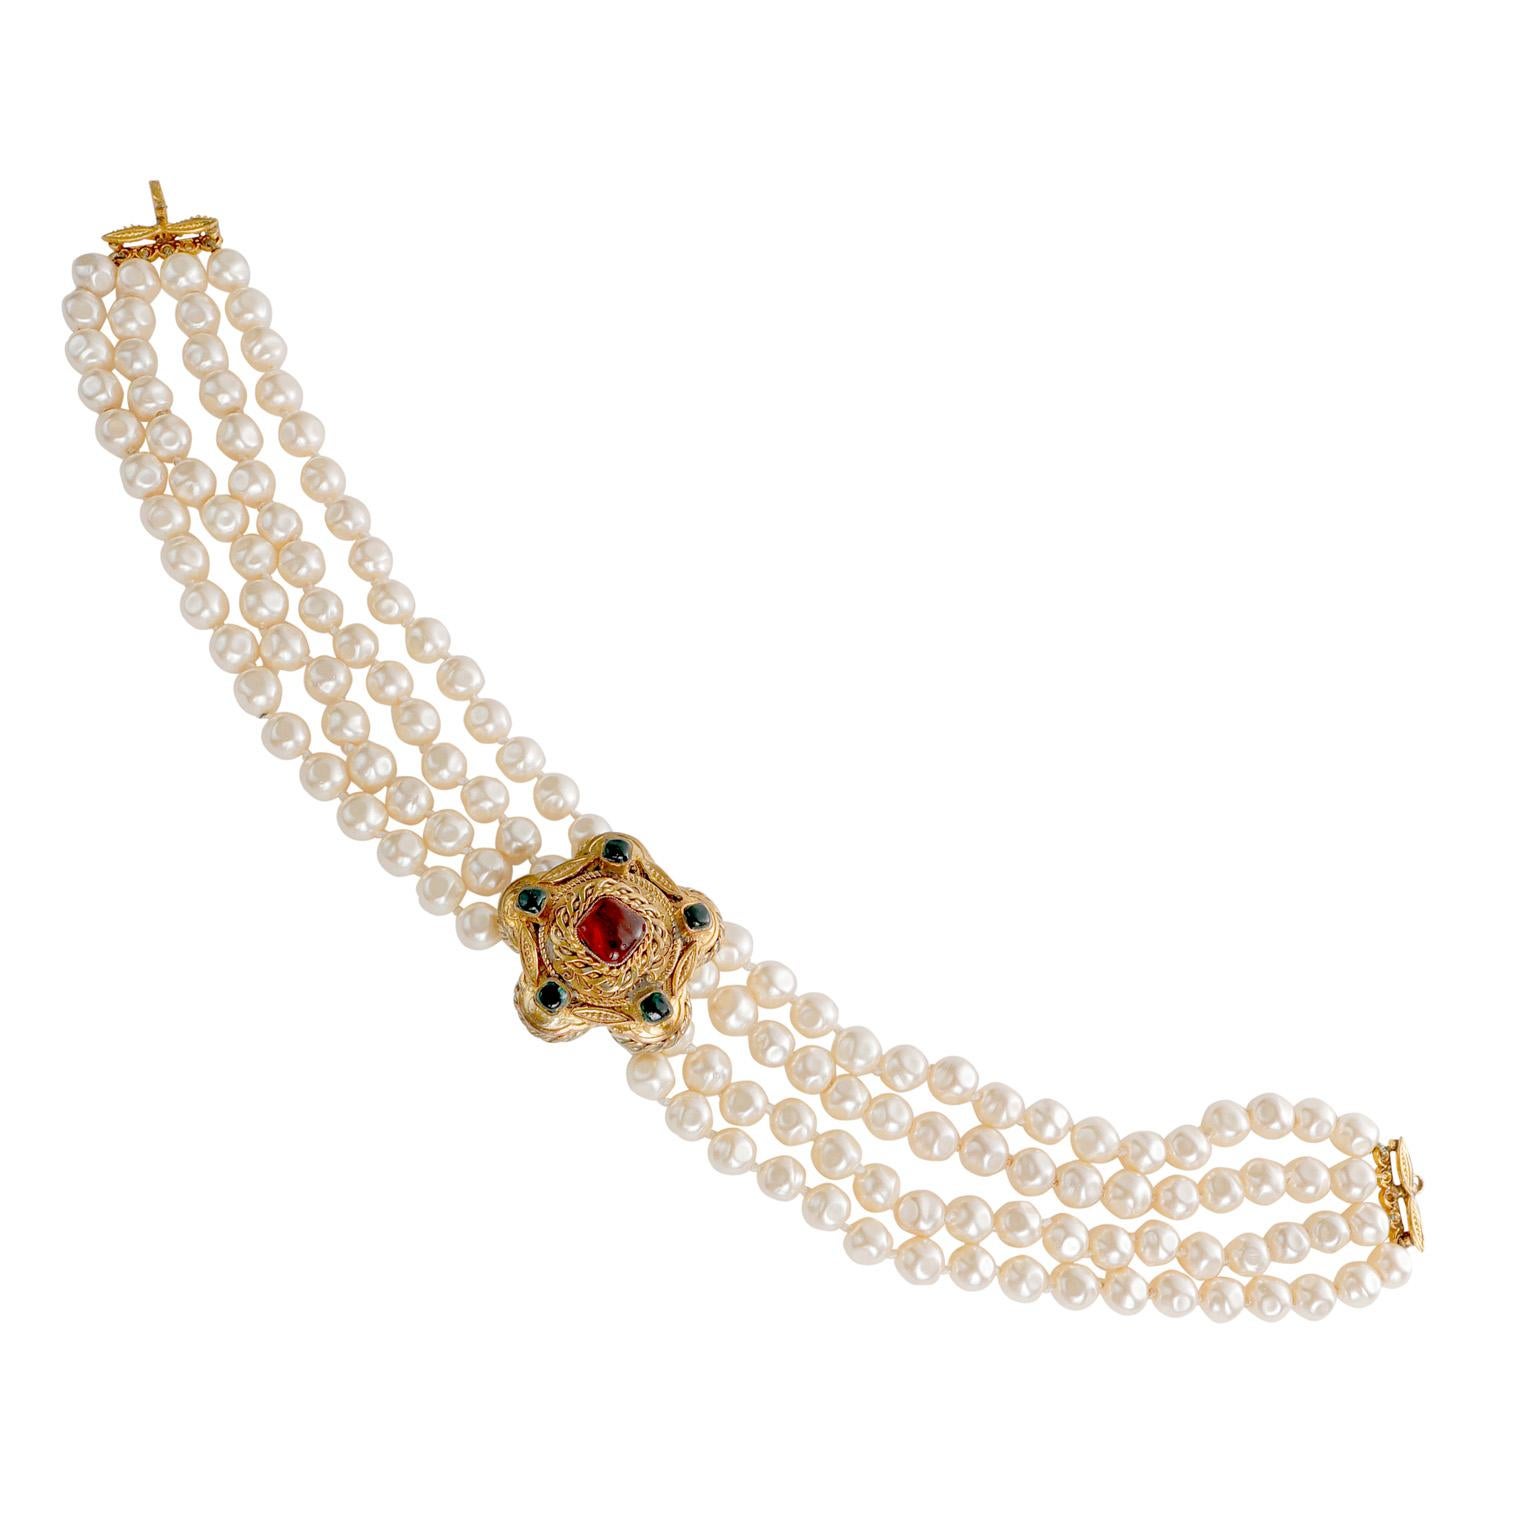 This authentic Chanel Pearl and Gripoix Choker is in excellent vintage condition.  Very early vintage four-layer faux pearl choker with gold tone ornate centerpiece.  Dark green and red Gripoix stone details.

PBF 13123